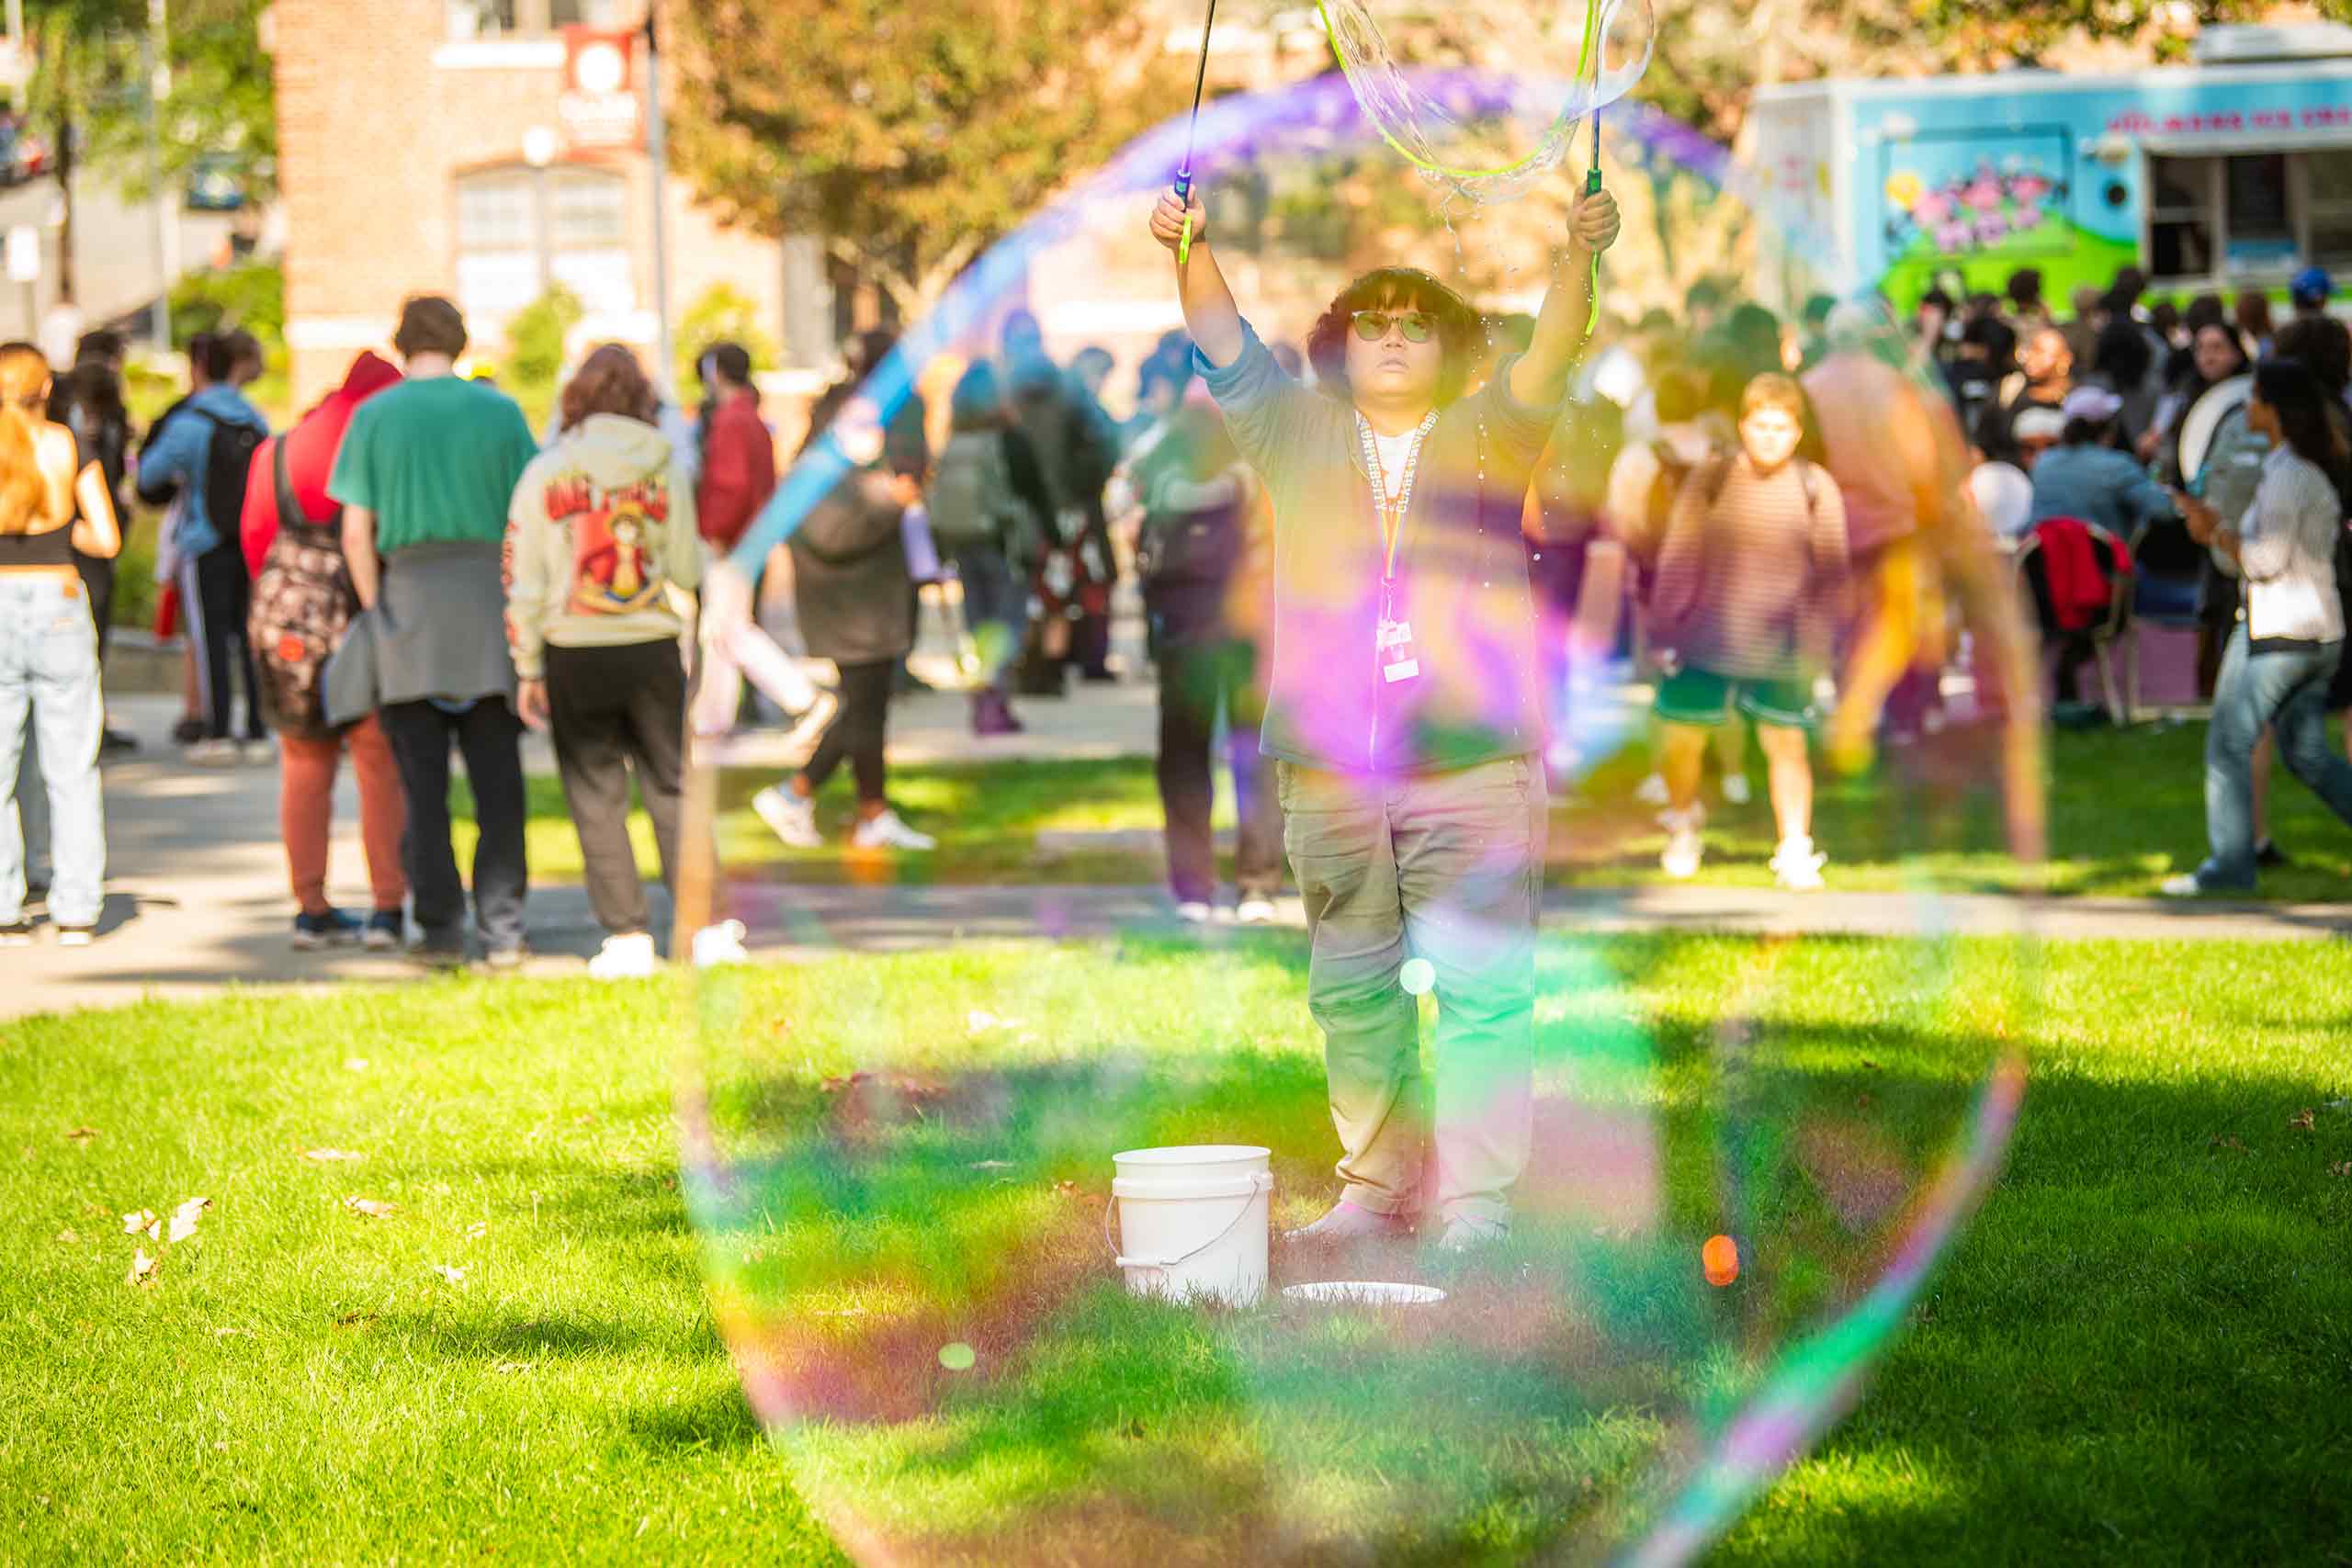 A person seen from the perspective of large soap bubbles during #FreshCheckDay, Clark University